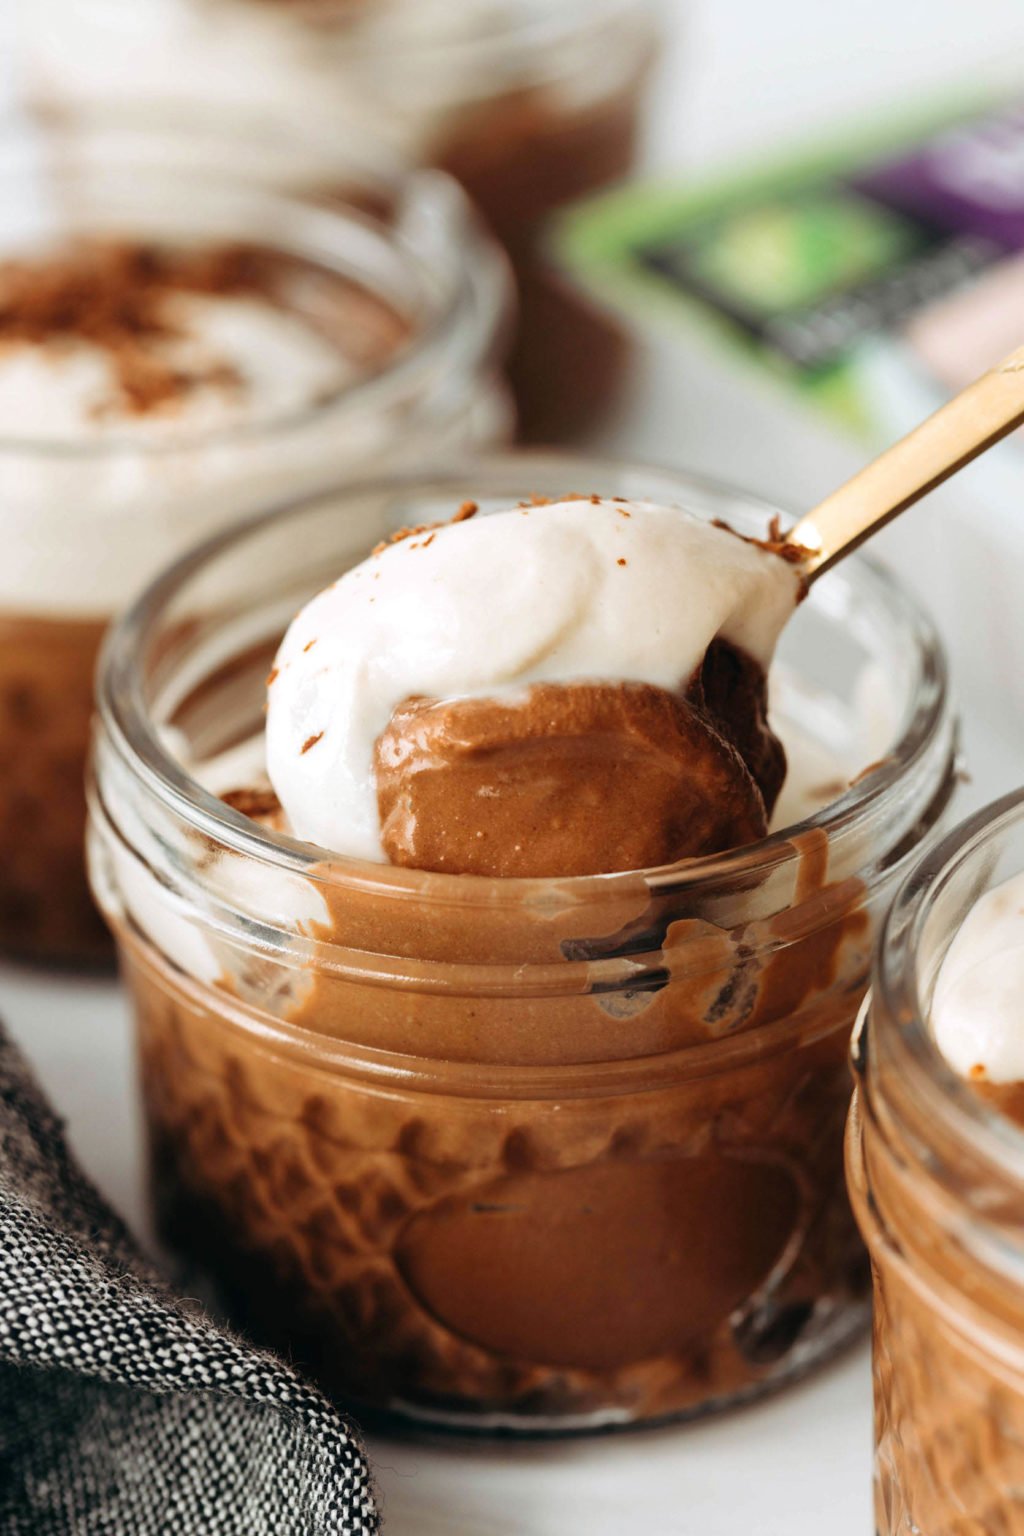 A mixture of chocolate pudding and tofu whipped cream is held in a small glass jar. It's being scooped out with a gold spoon.